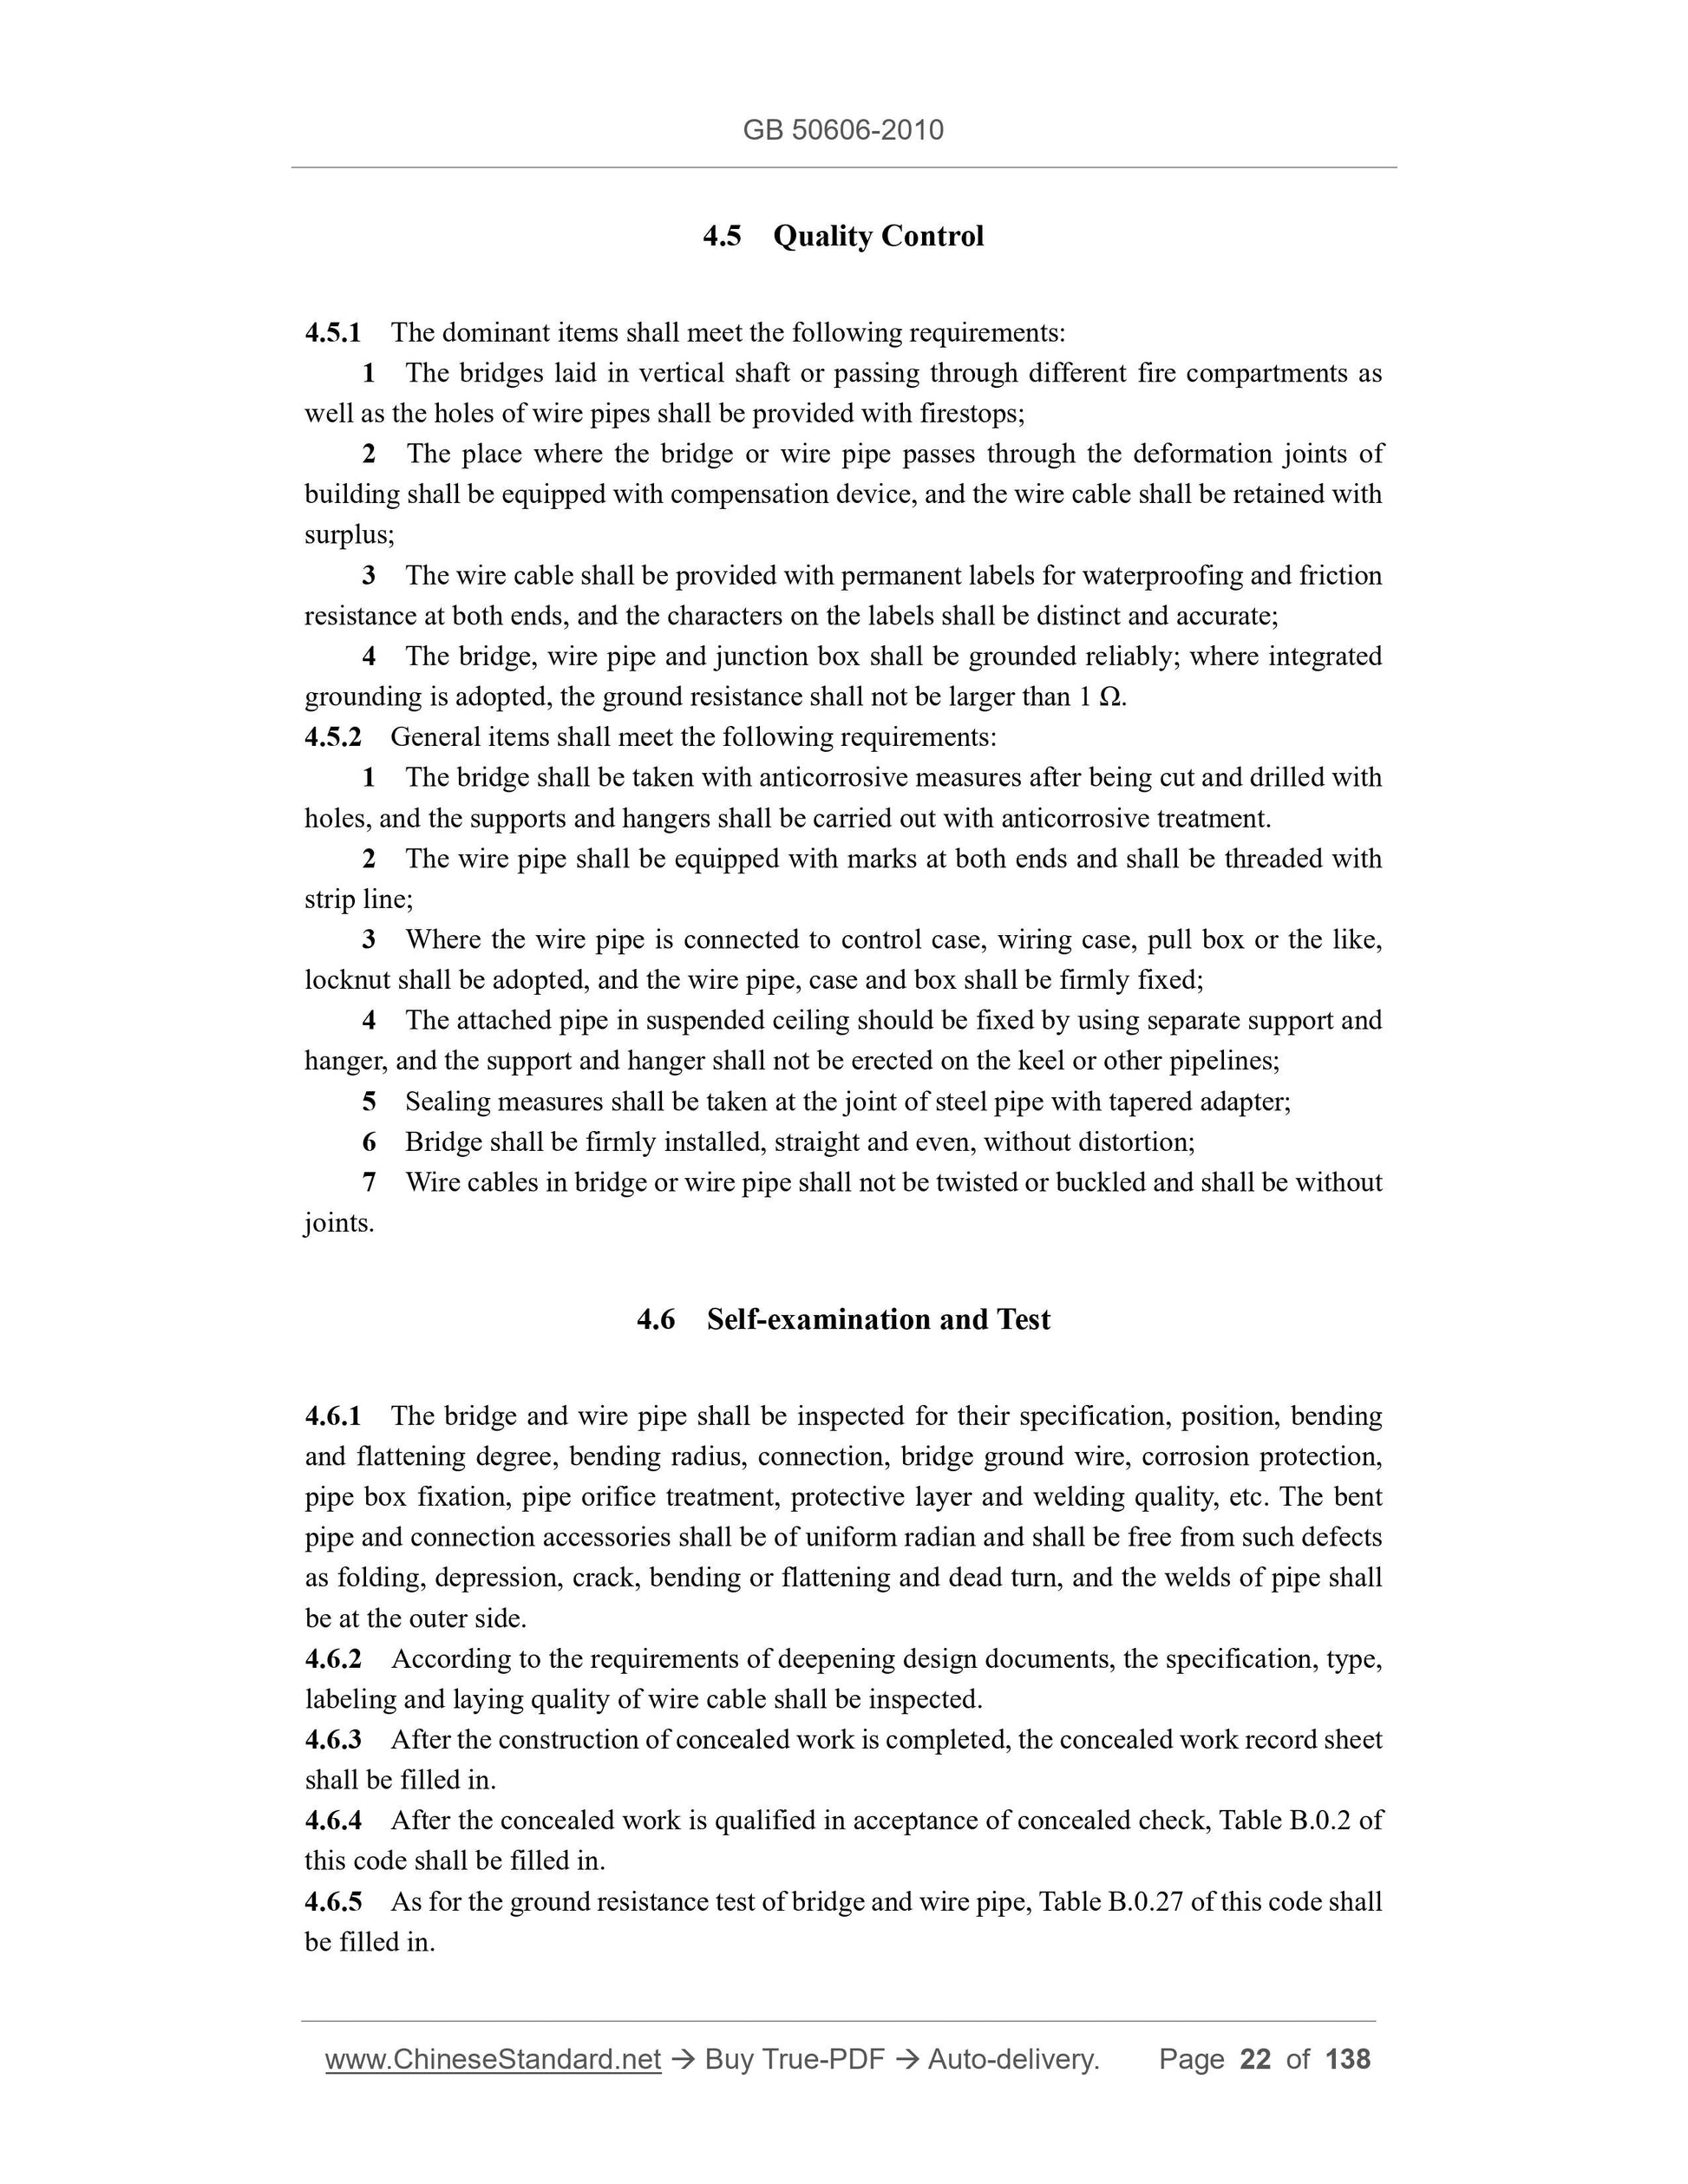 GB 50606-2010 Page 12